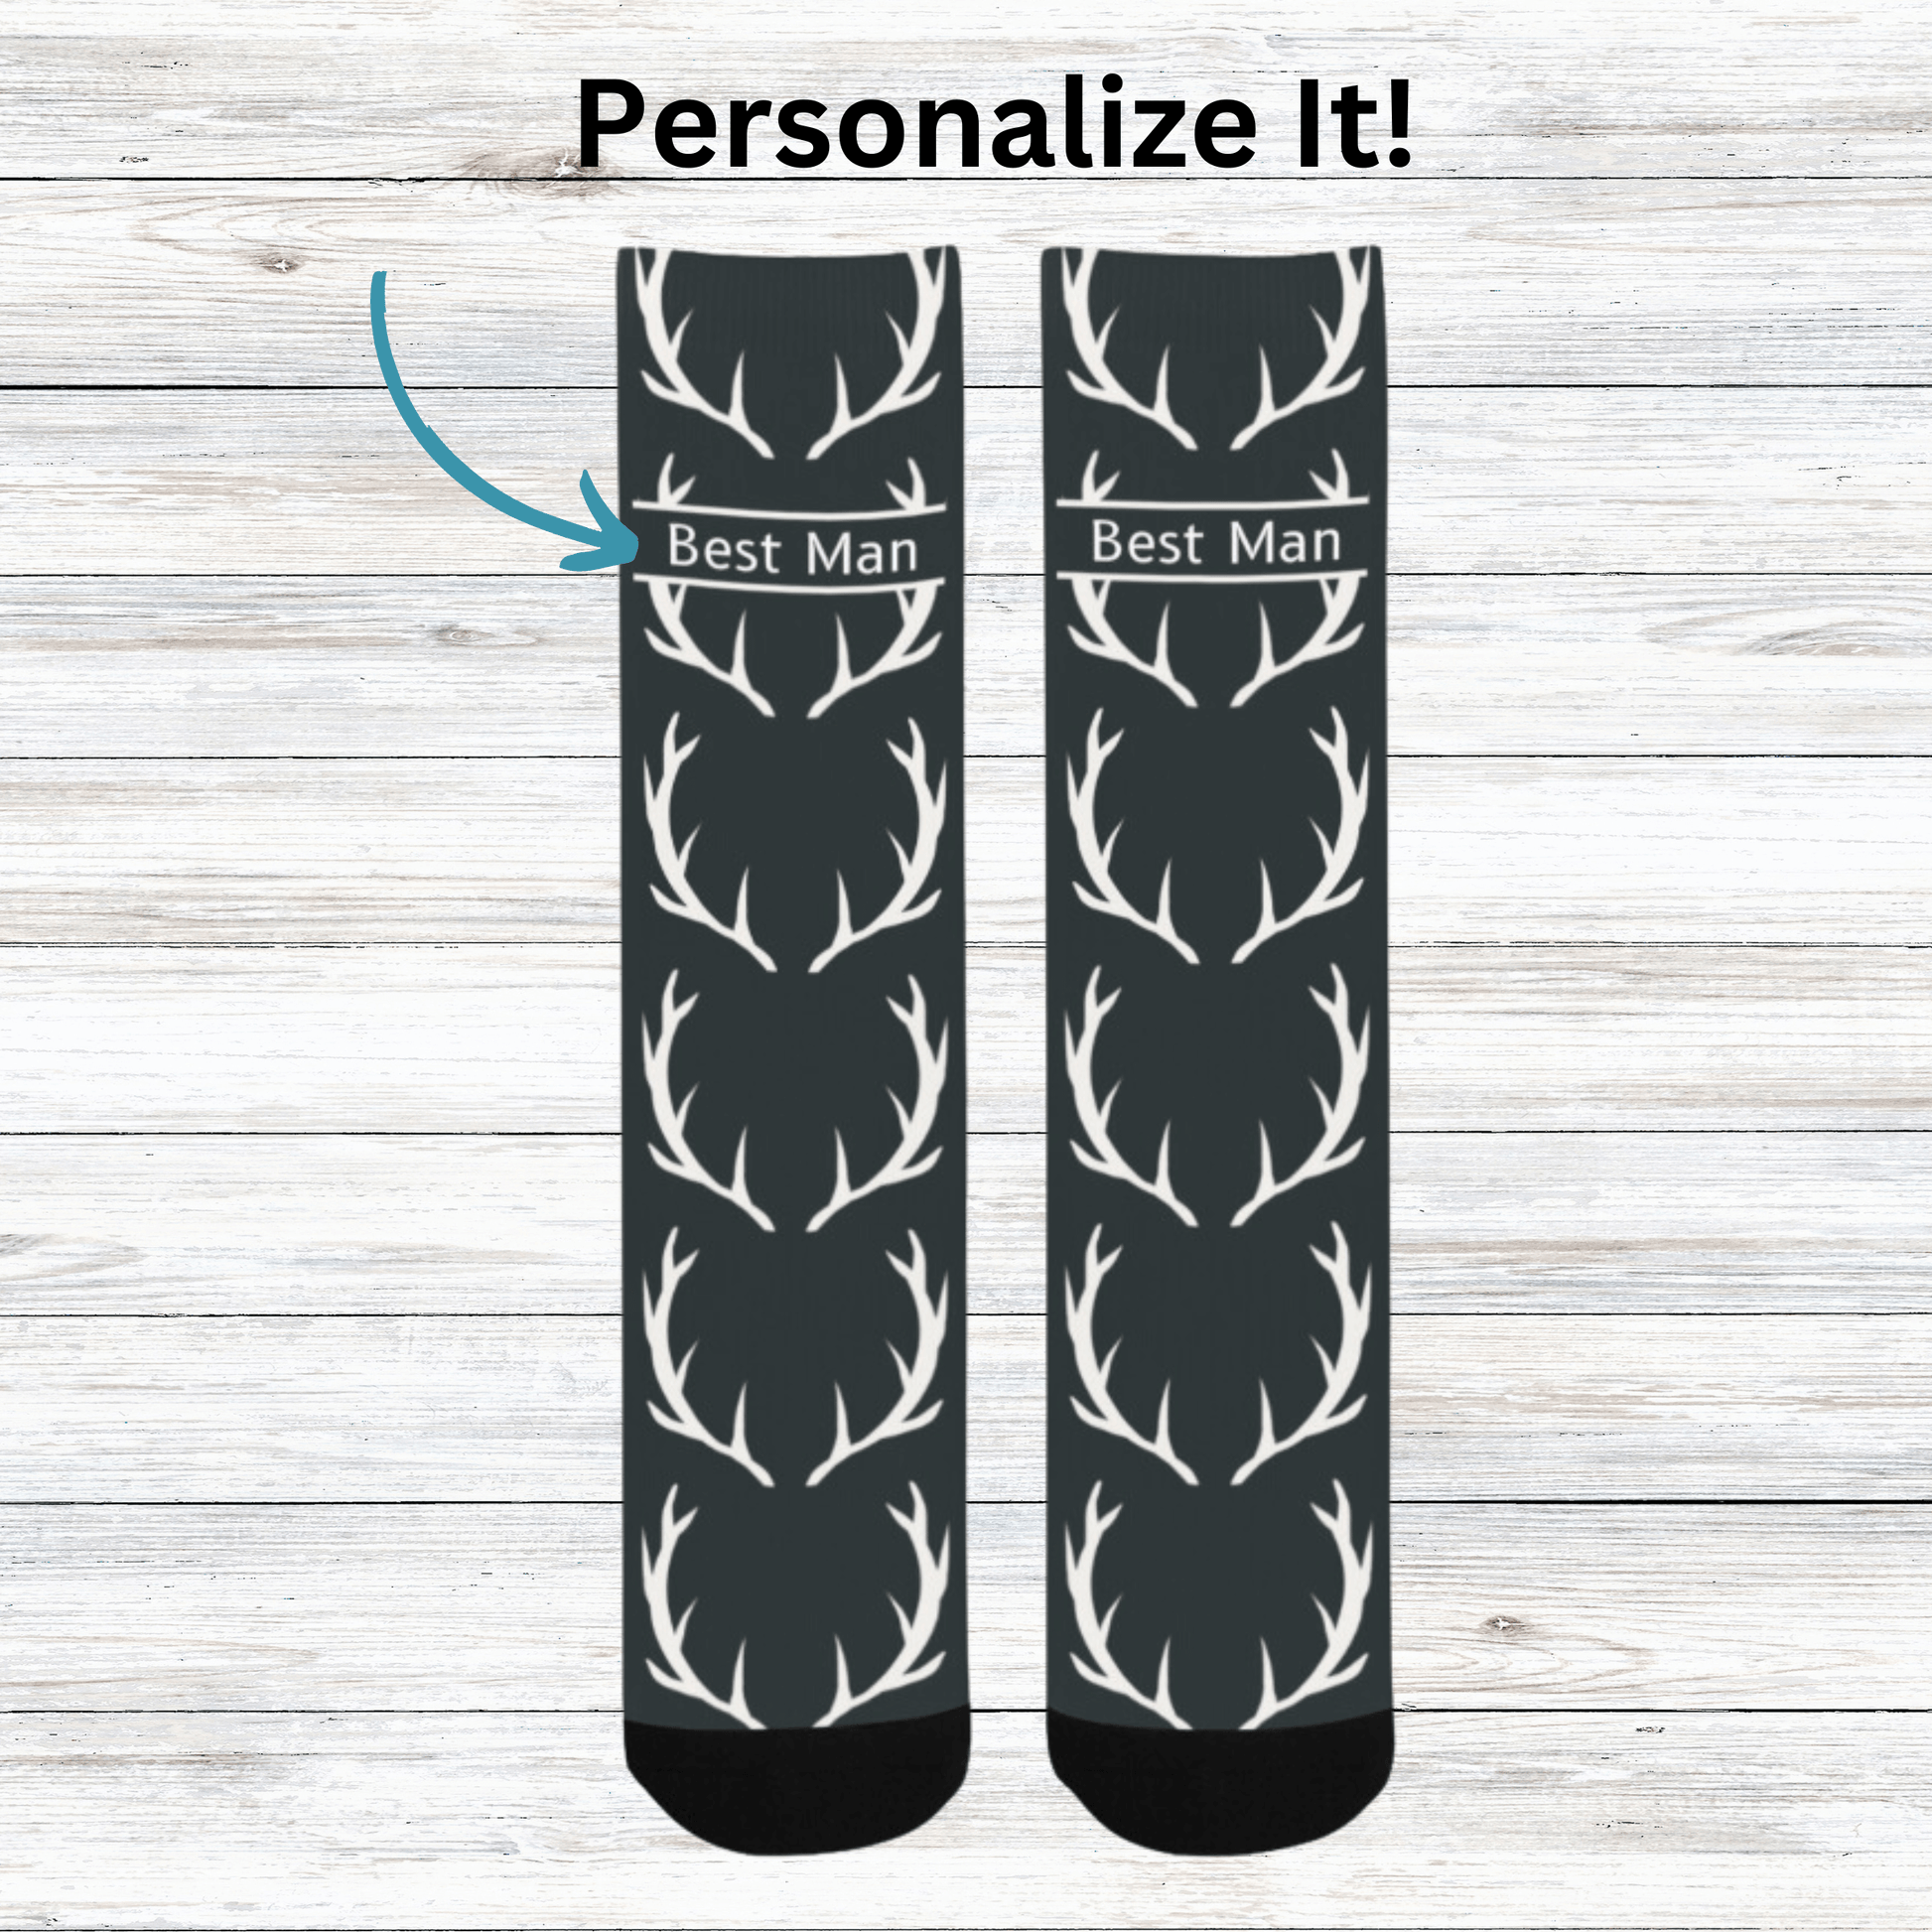 Personalized groomsmen socks with deer horns.  Up to 15 characters to personalize